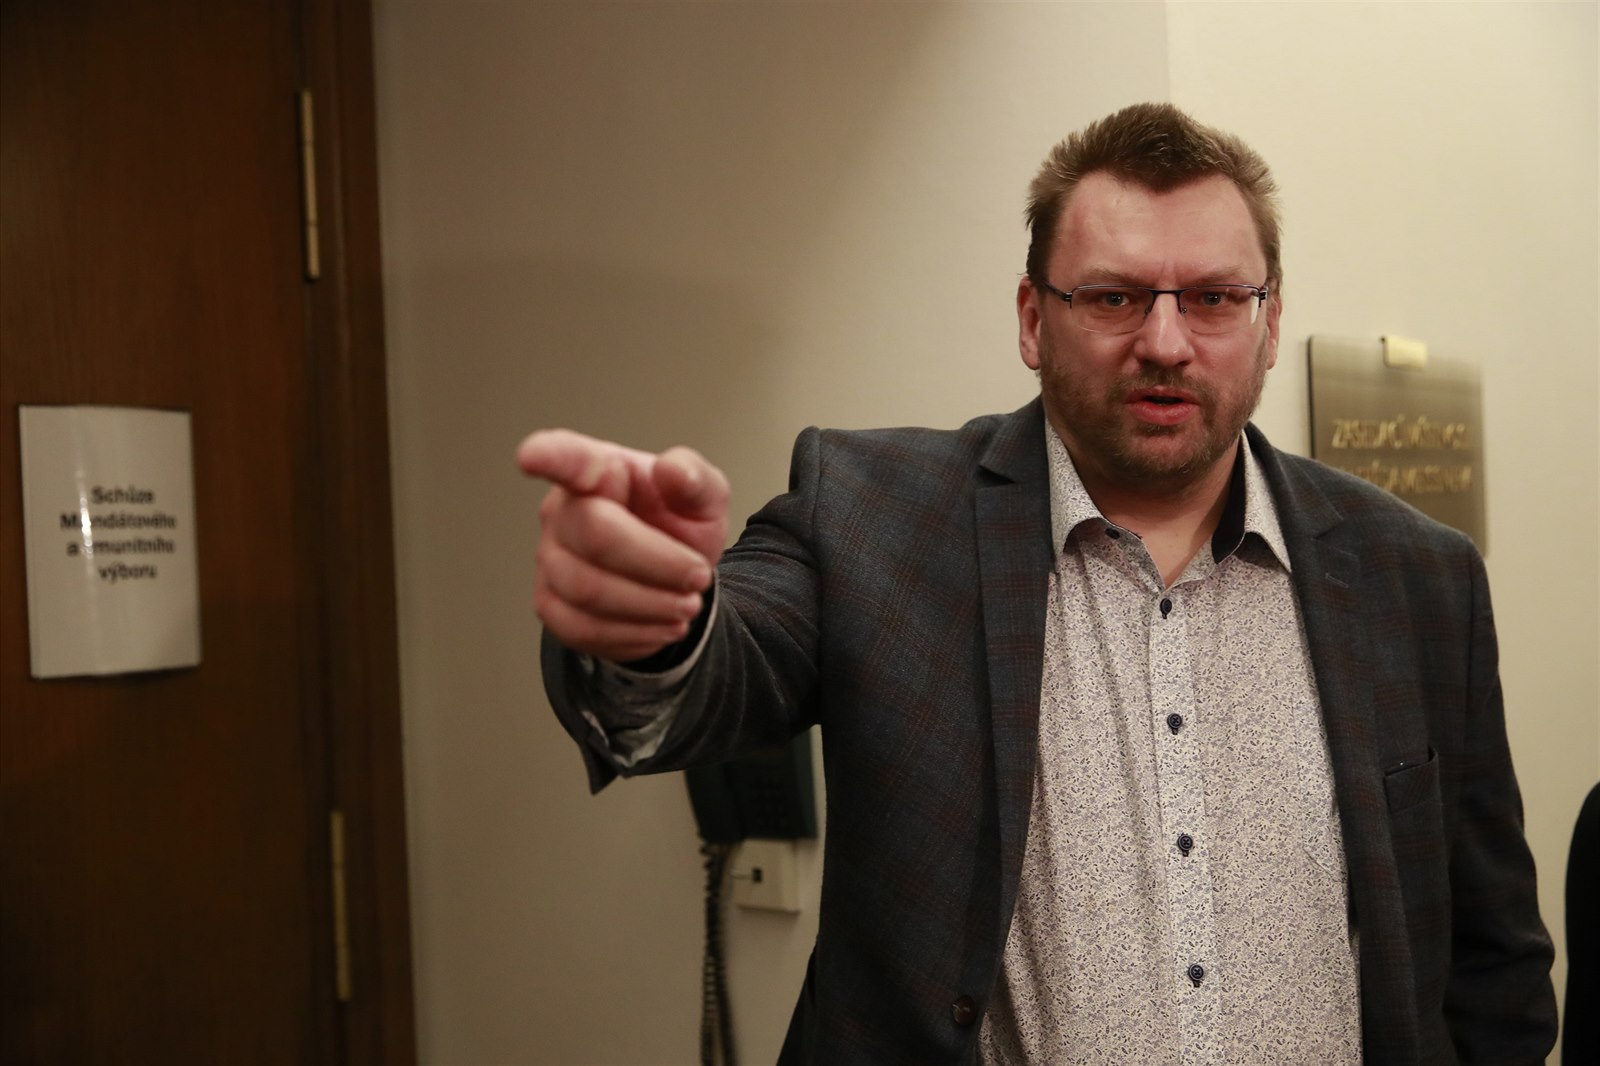 Committee recommends stripping immunity of MP Volny - Czech Points